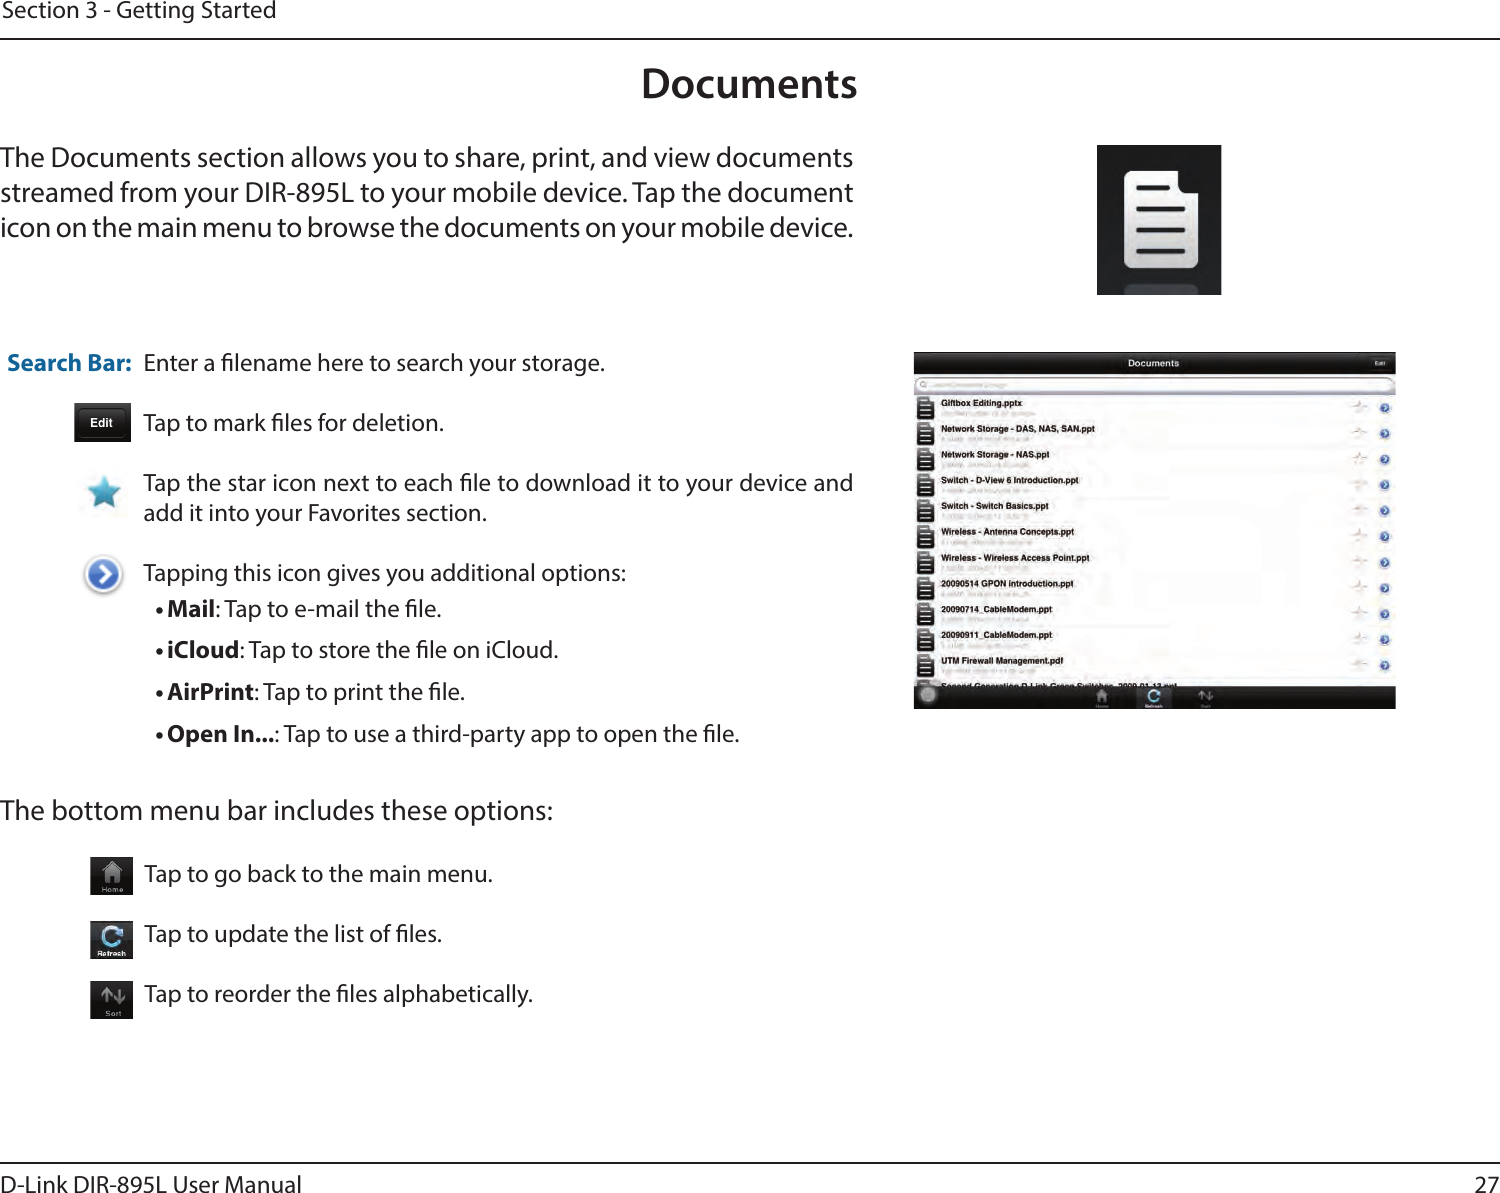 27D-Link DIR-895L User ManualSection 3 - Getting StartedDocumentsThe Documents section allows you to share, print, and view documents streamed from your DIR-895L to your mobile device. Tap the document icon on the main menu to browse the documents on your mobile device.Enter a lename here to search your storage.Tap to mark les for deletion.Tap the star icon next to each le to download it to your device and add it into your Favorites section.Tapping this icon gives you additional options:• Mail: Tap to e-mail the le.• iCloud: Tap to store the le on iCloud.• AirPrint: Tap to print the le.• Open In...: Tap to use a third-party app to open the le.The bottom menu bar includes these options:Search Bar: Tap to go back to the main menu.Tap to update the list of les.Tap to reorder the les alphabetically.